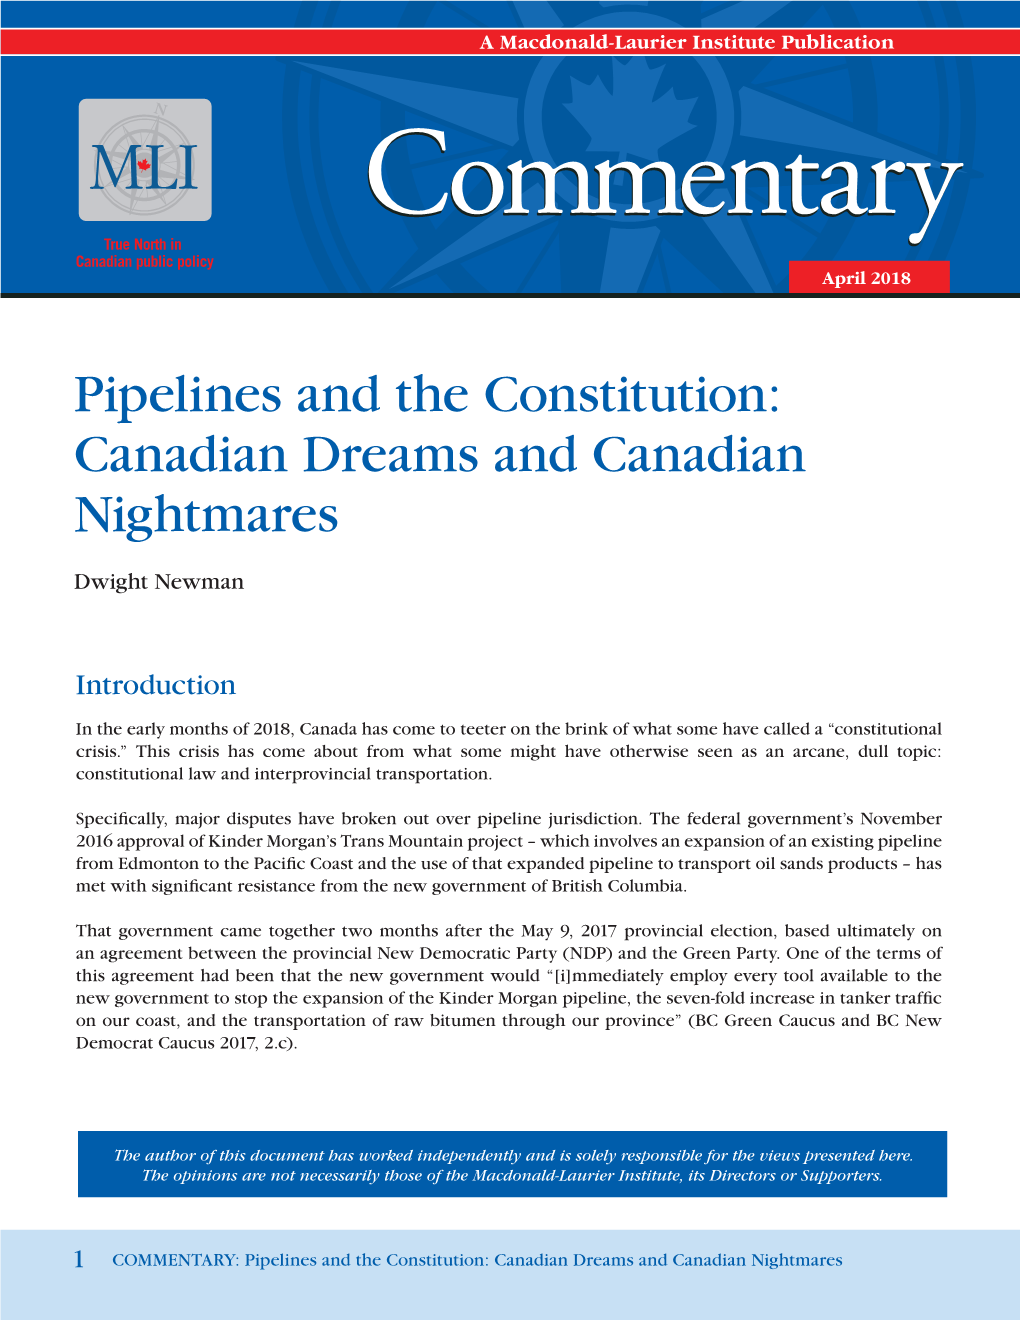 Pipelines and the Constitution: Canadian Dreams and Canadian Nightmares